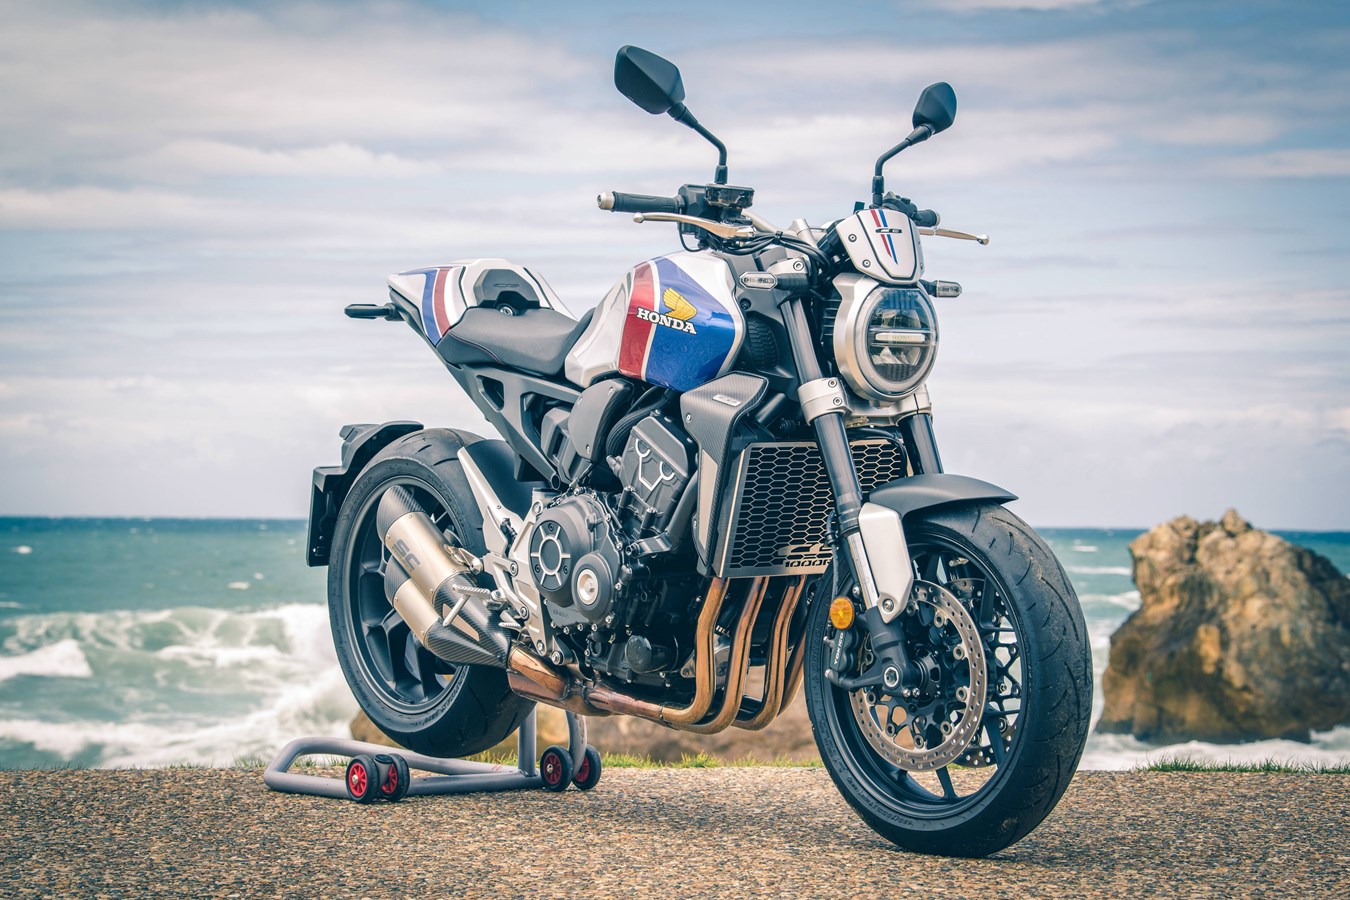 A dozen customized CB1000R's at Wheels and Waves 2019